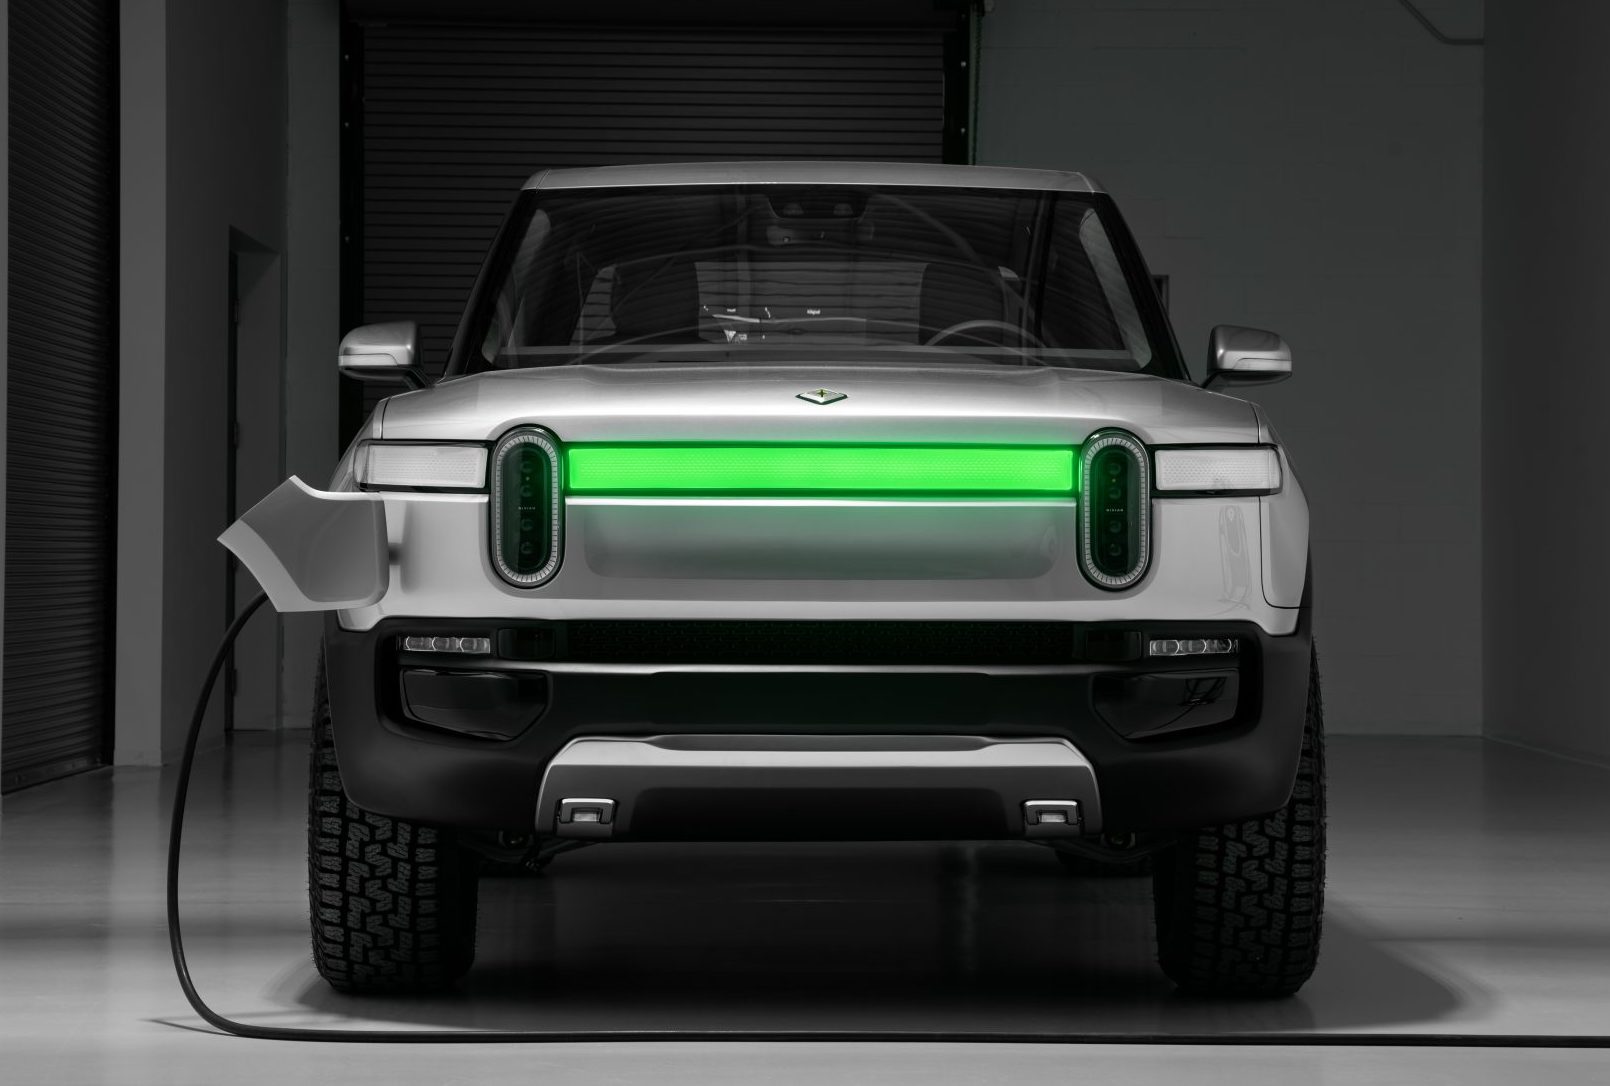 Ford invests $500m in Rivian, co-develop electric vehicles